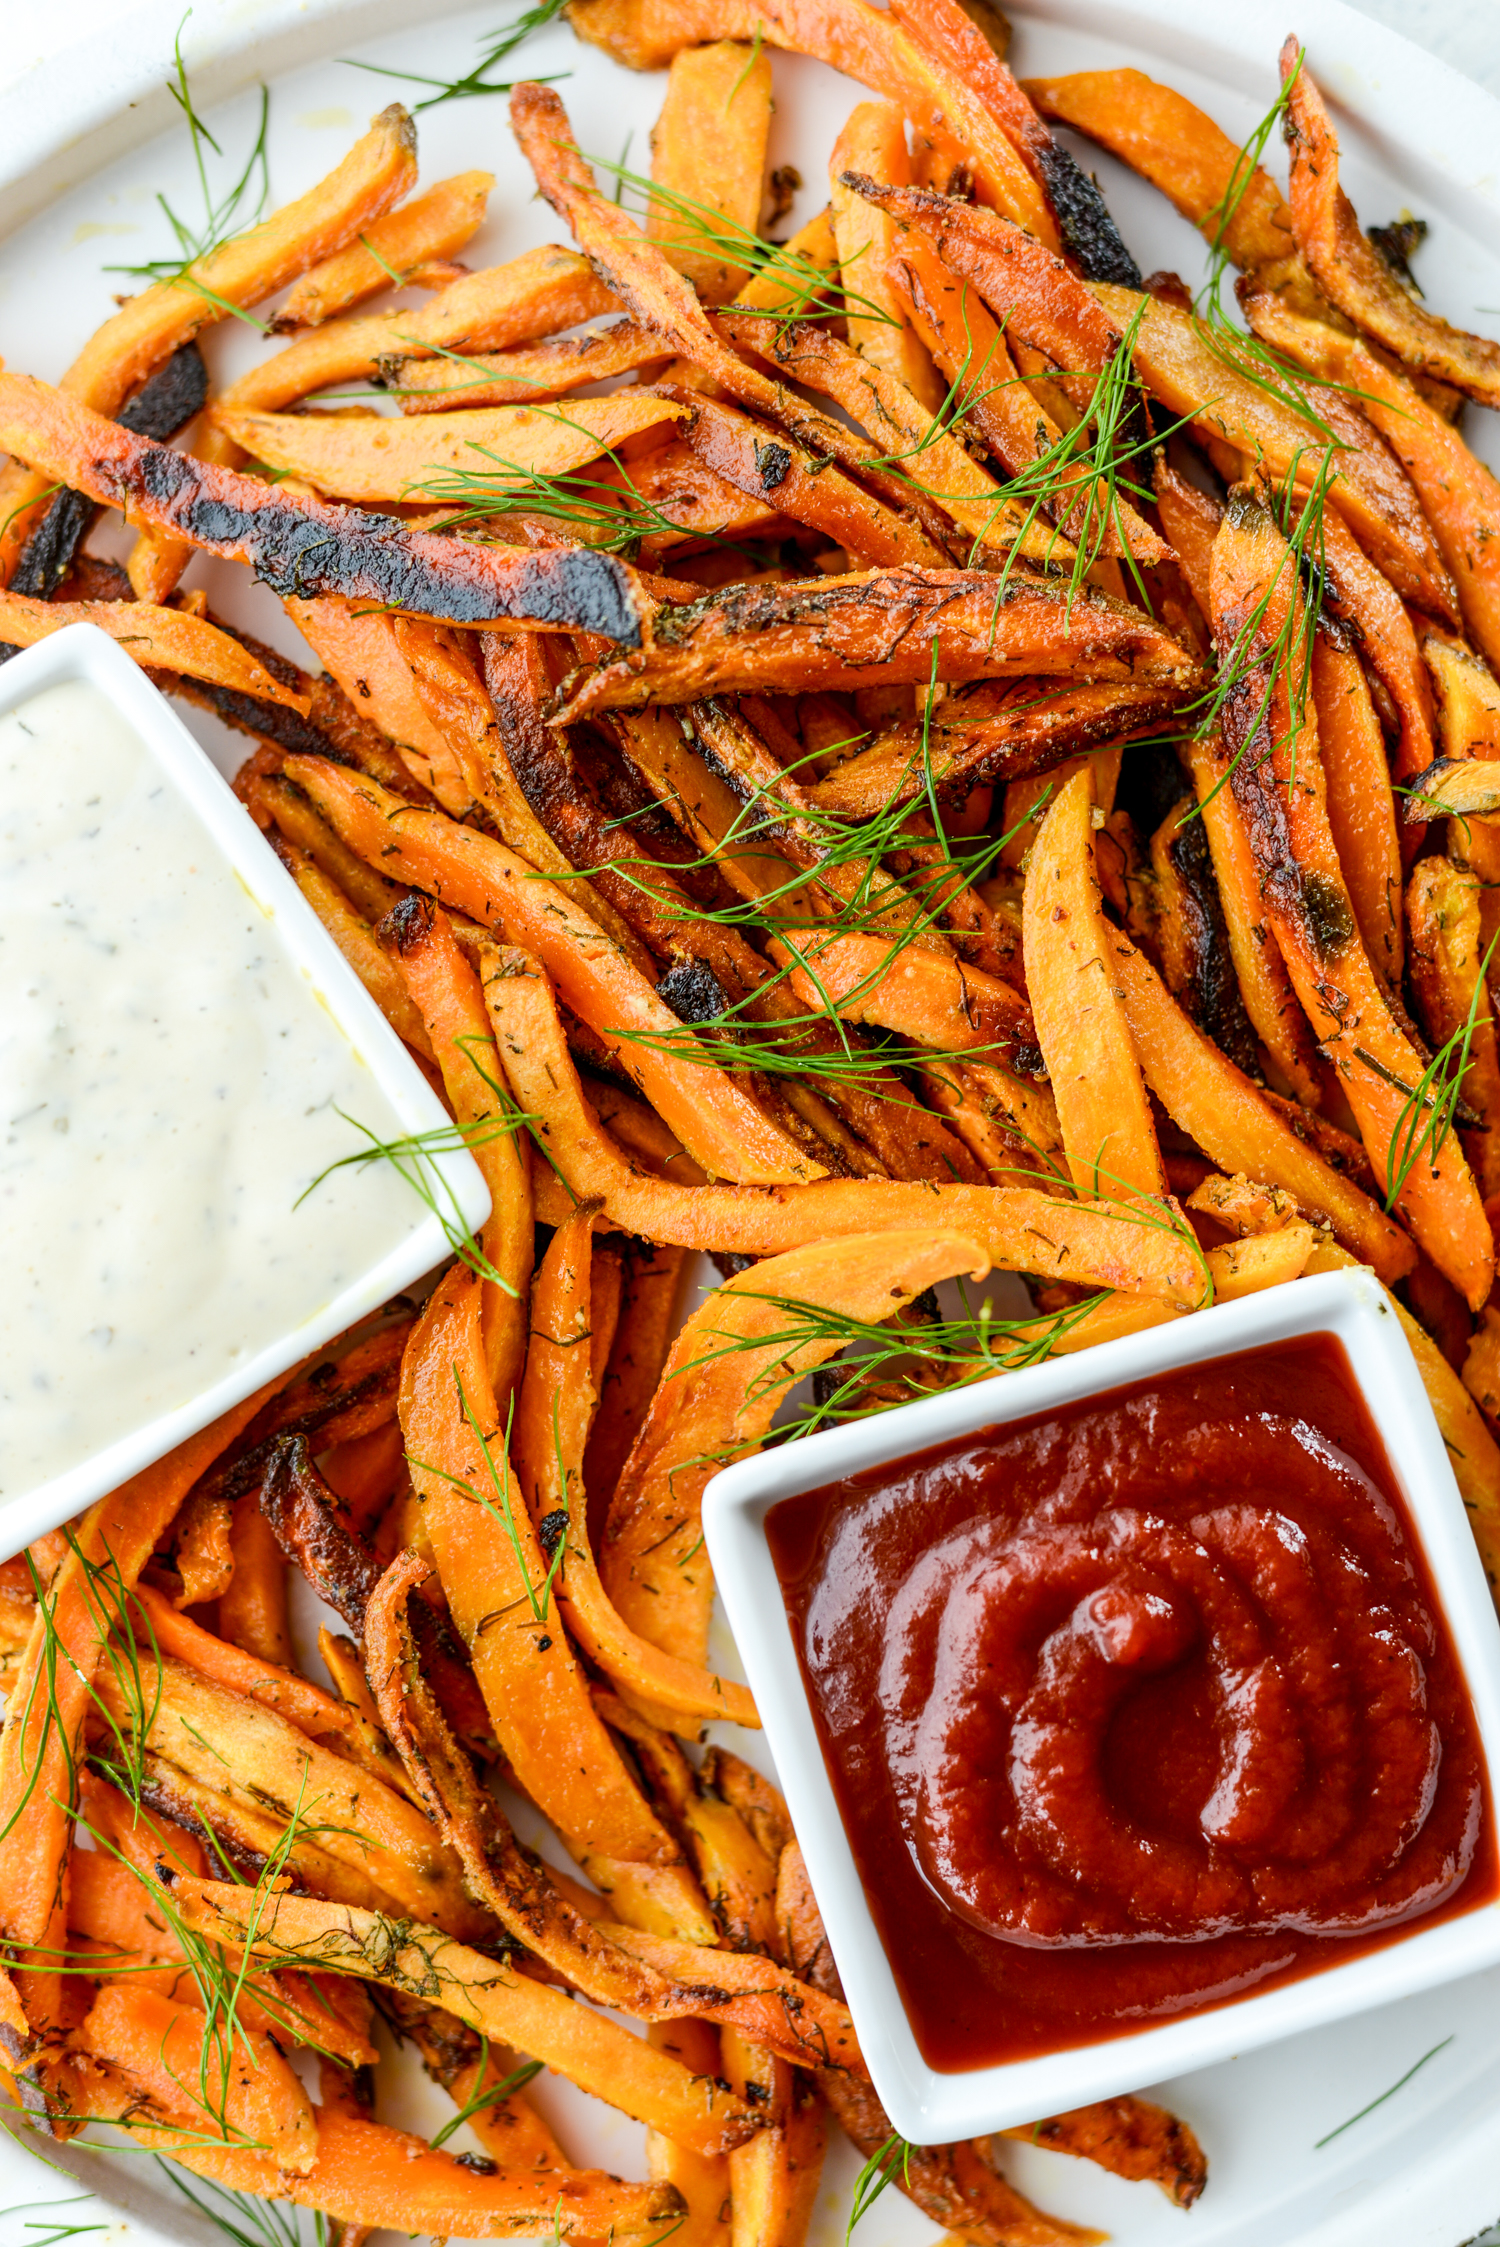 Crispy Homemade Dairy-Free Ranch Fries | simplerootswellness.com #frenchfries #easyrecipes #mealprep #ranch #healthy